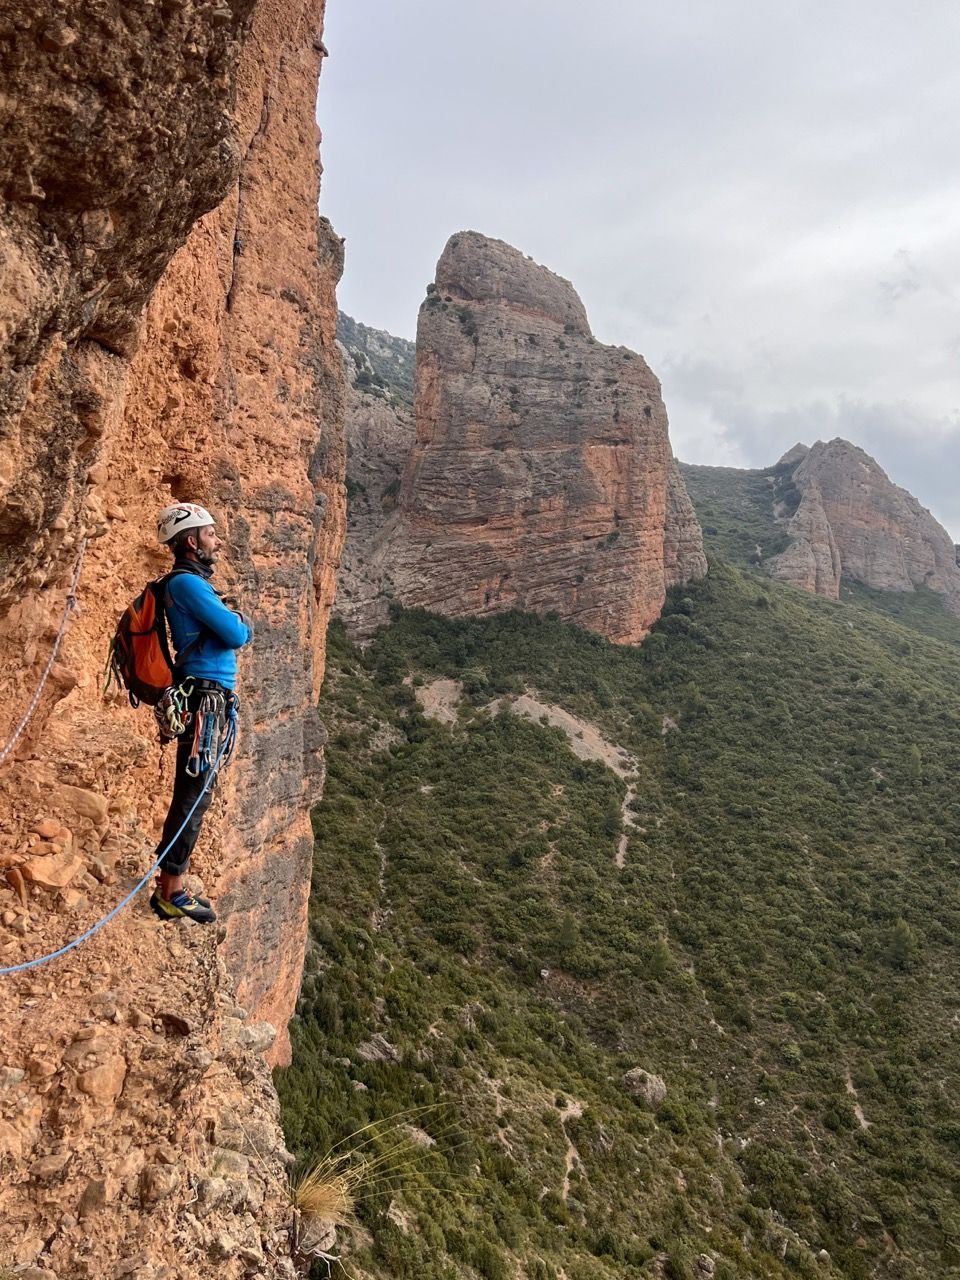 4 Unique places to practice climbing in Huesca 🧗 ♀️